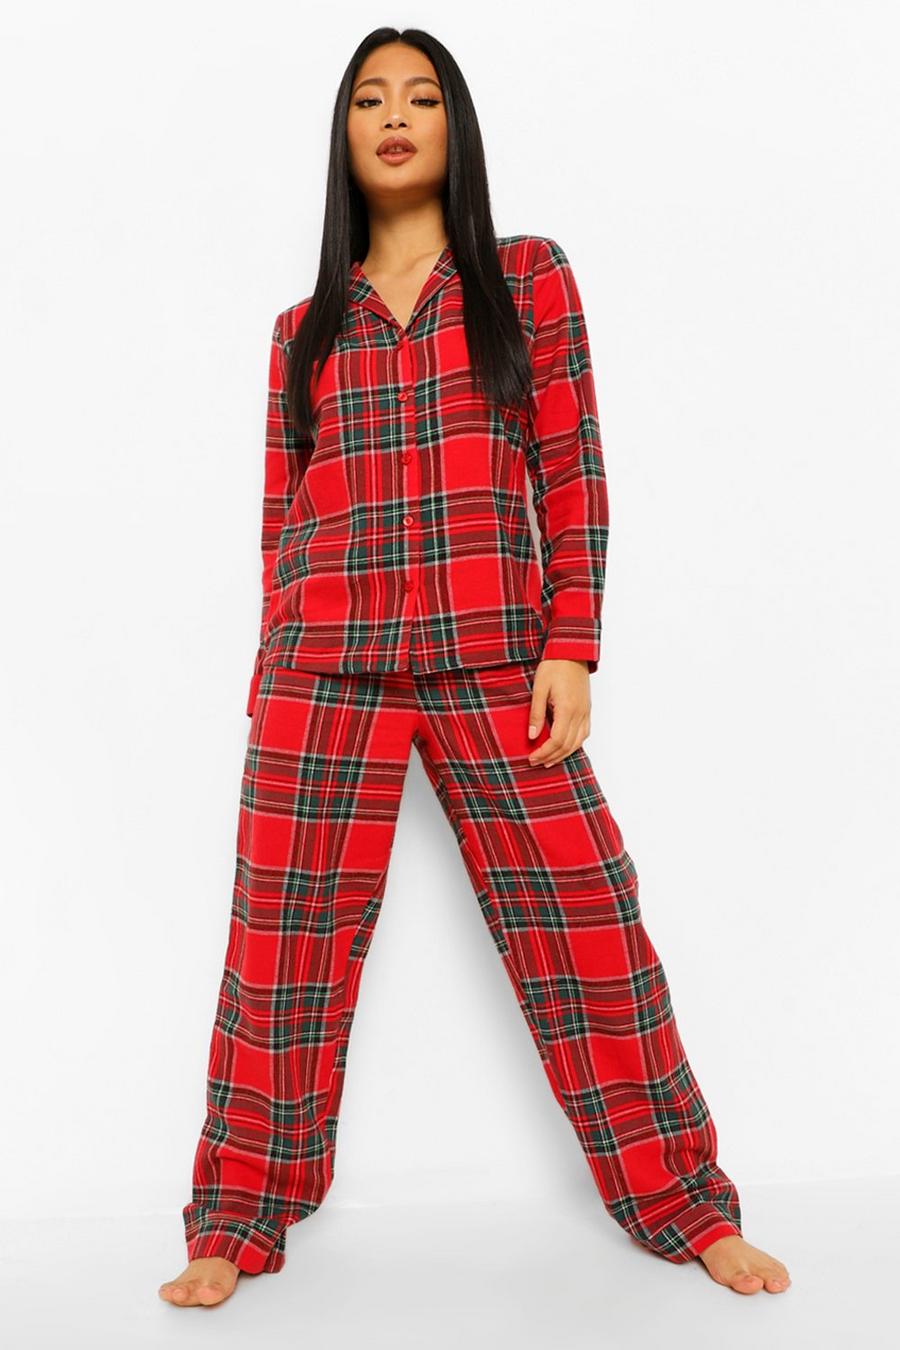 Red rouge Petite Christmas Check Long Sleeve Top and Trouser PJ Set